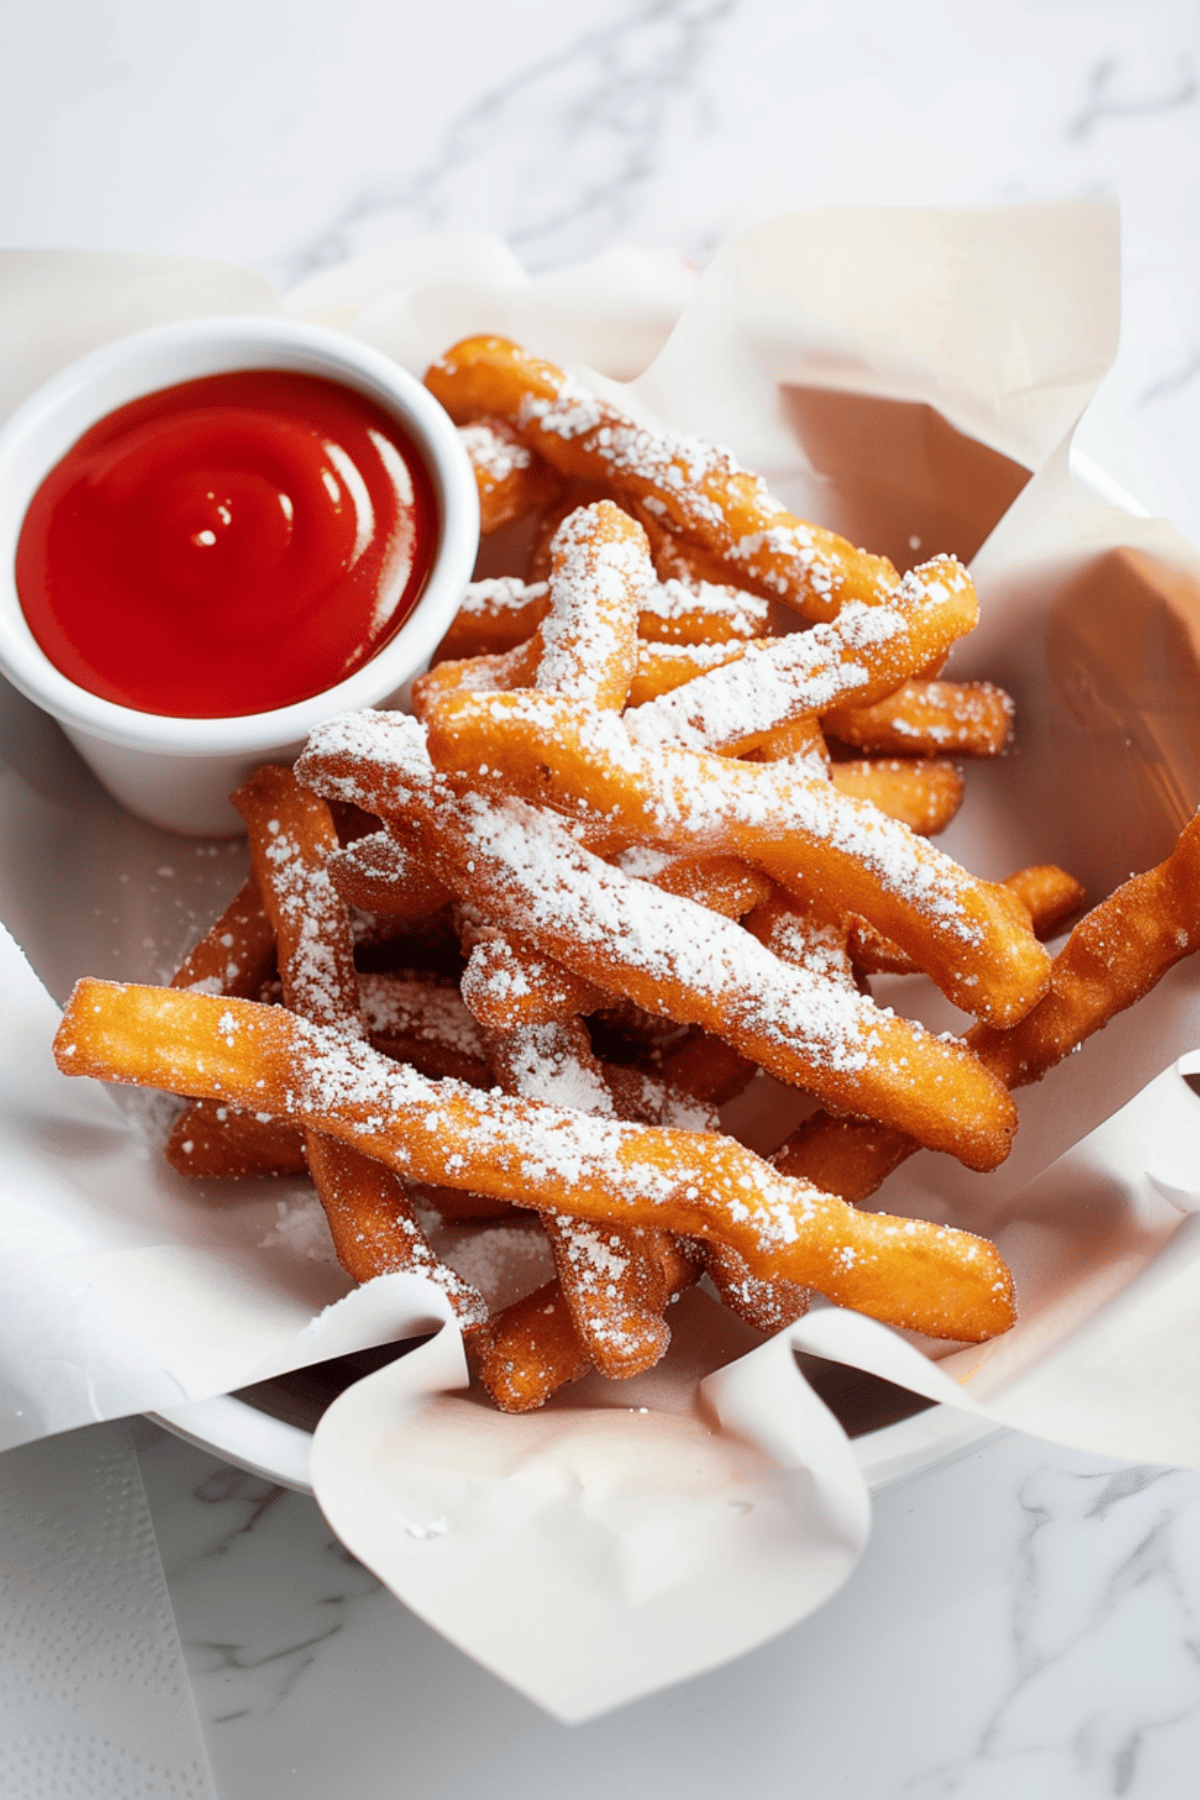 Homemade funnel cake fries, fried to perfection and served with a sprinkle of powdered sugar